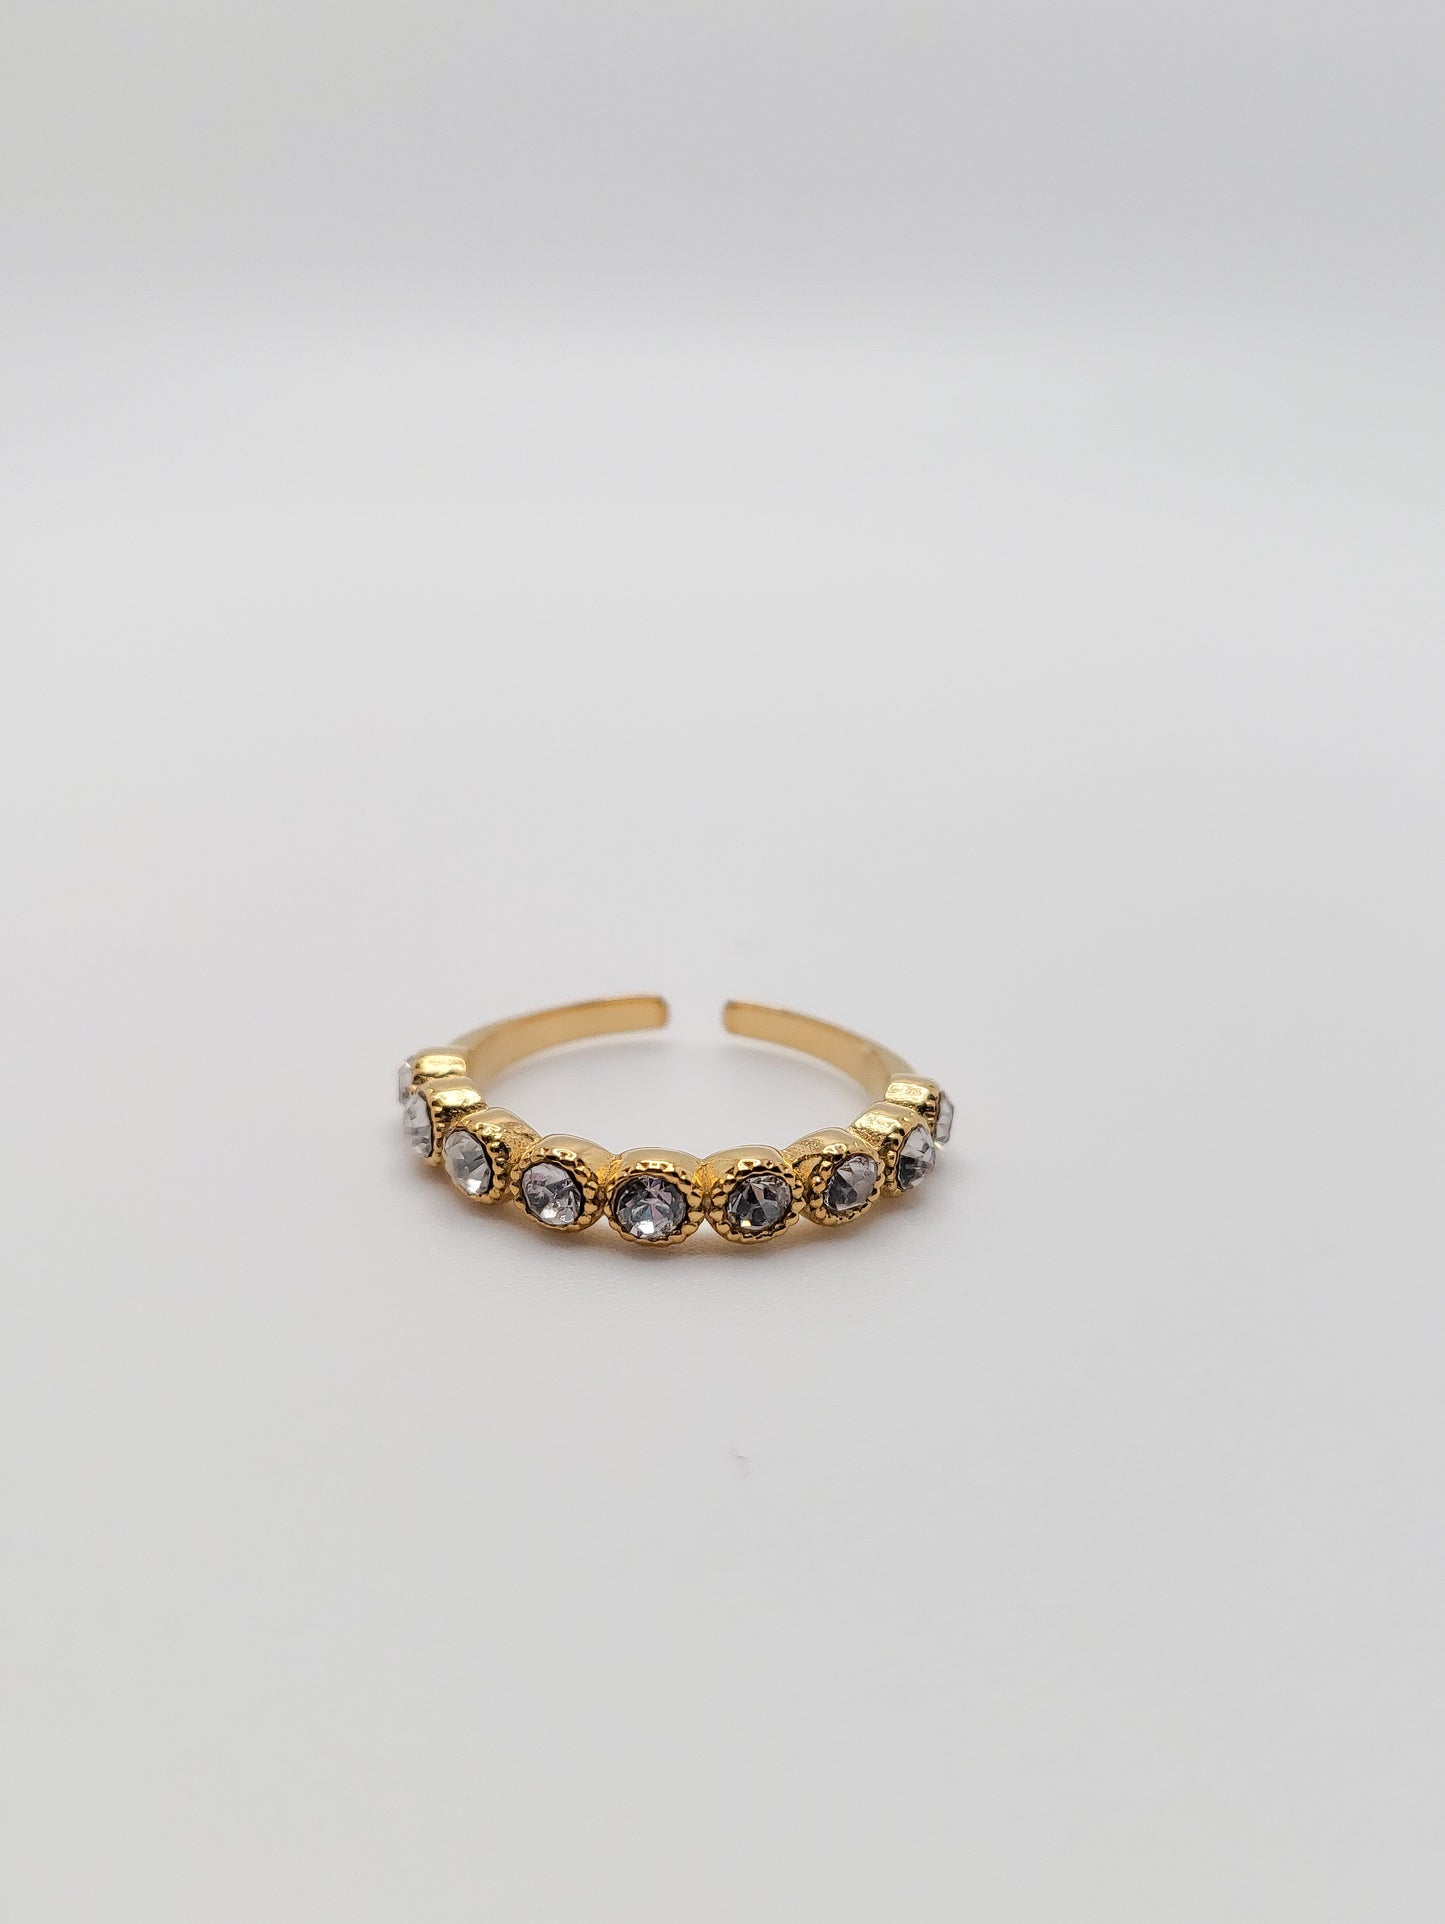 Queen gold plated adjustable ring